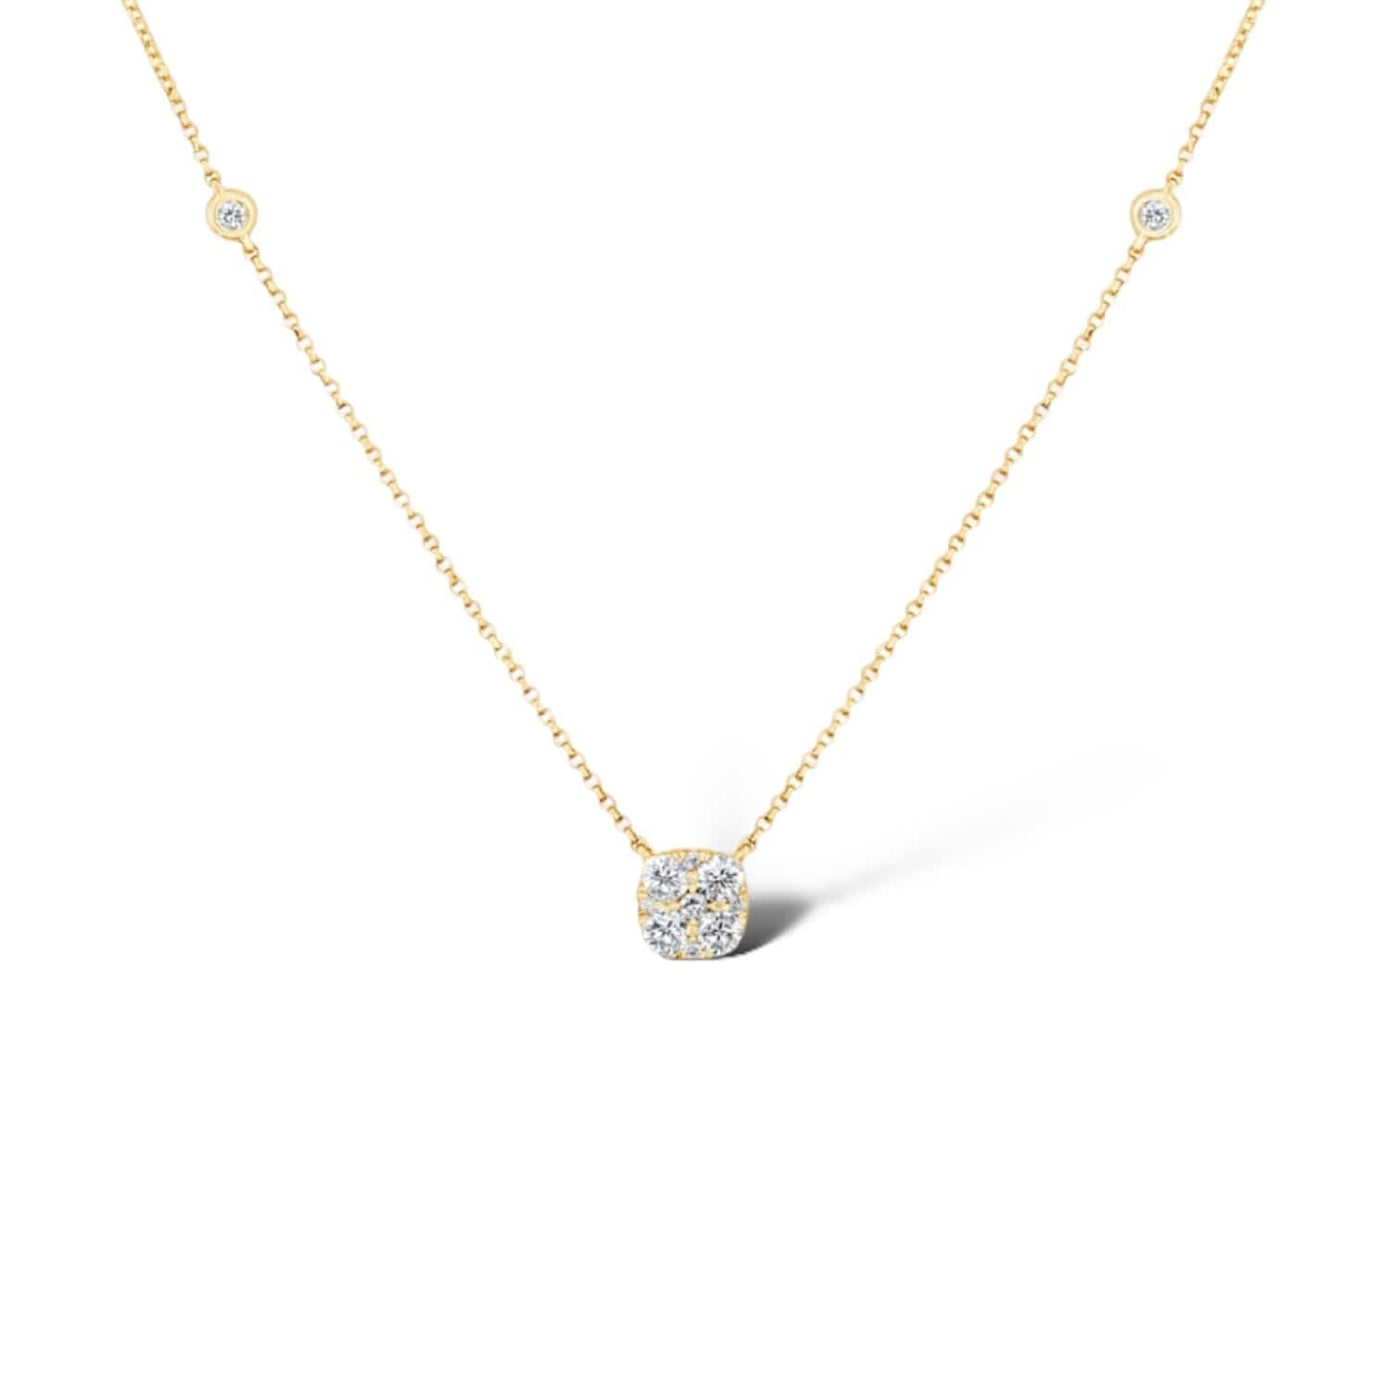 HANGING CUSHION PENDANT WITH DIAMONDS ON THE CHAINS